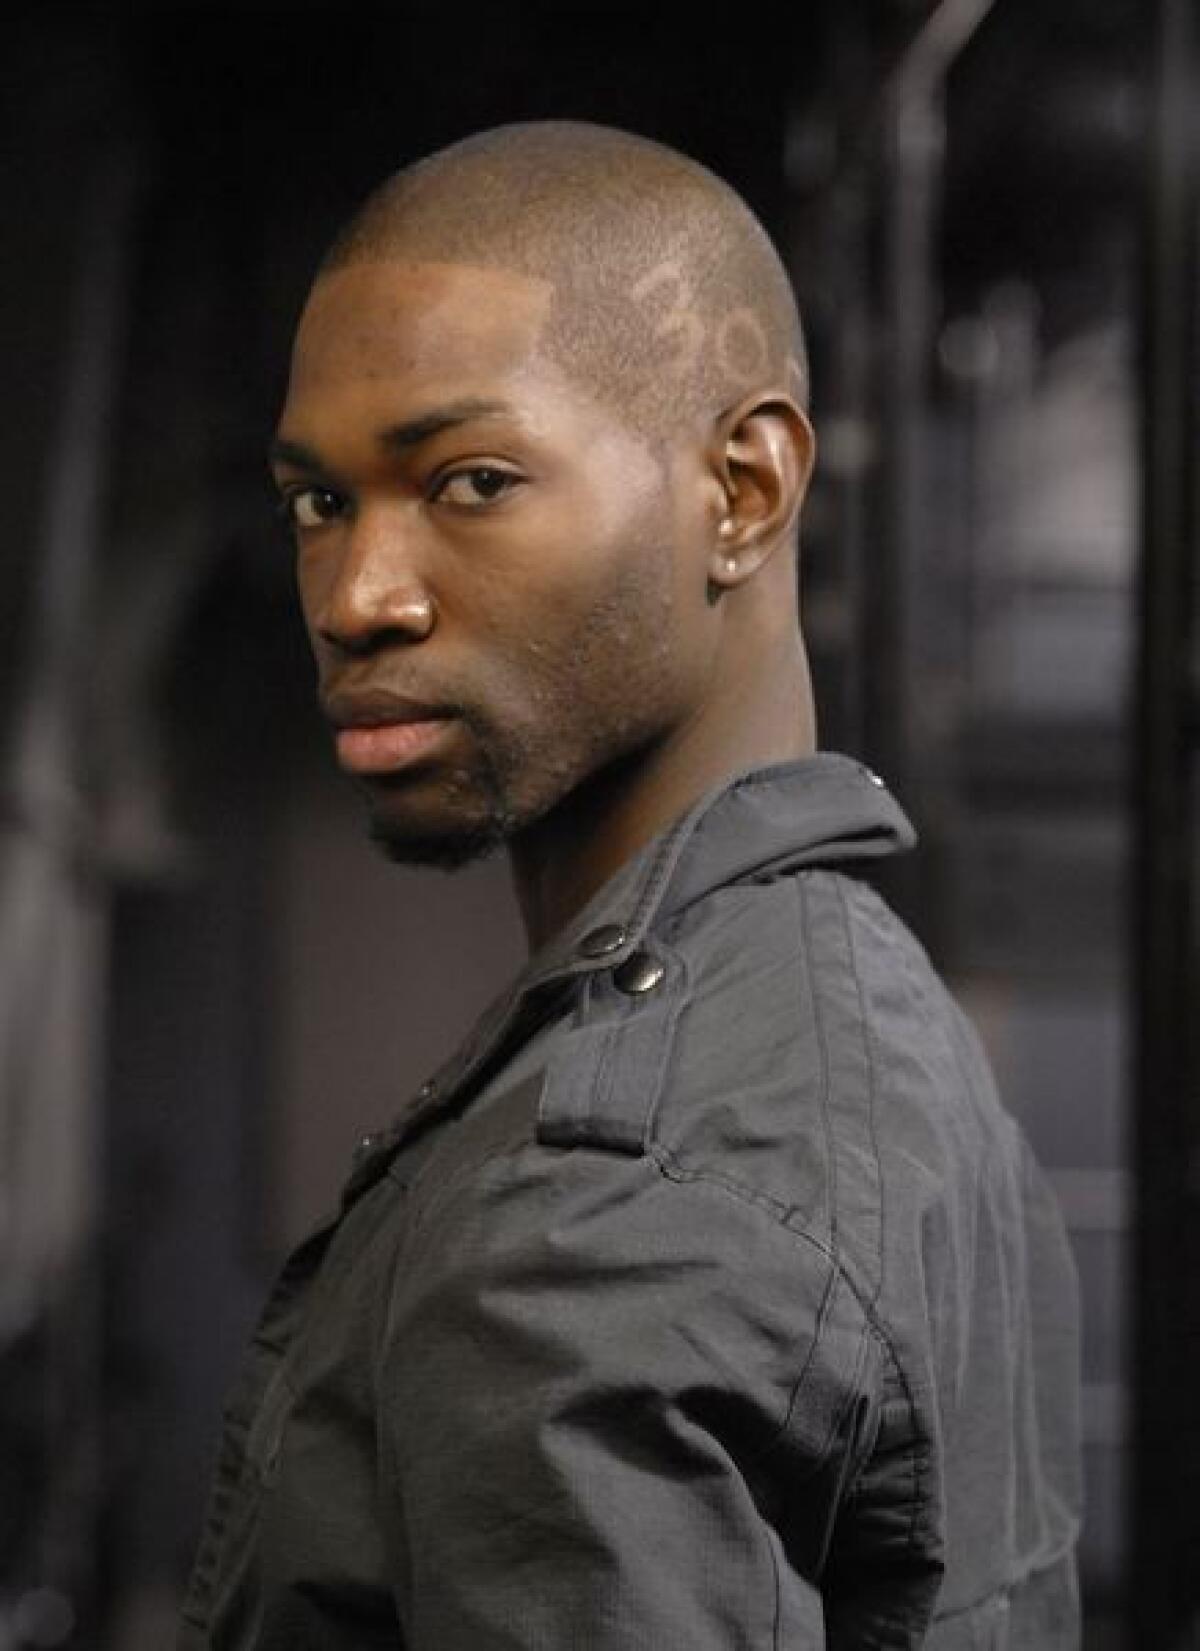 Tarell Alvin McCraney will direct a new version of Shakespeare's "Antony and Cleopatra," which will premiere next year.